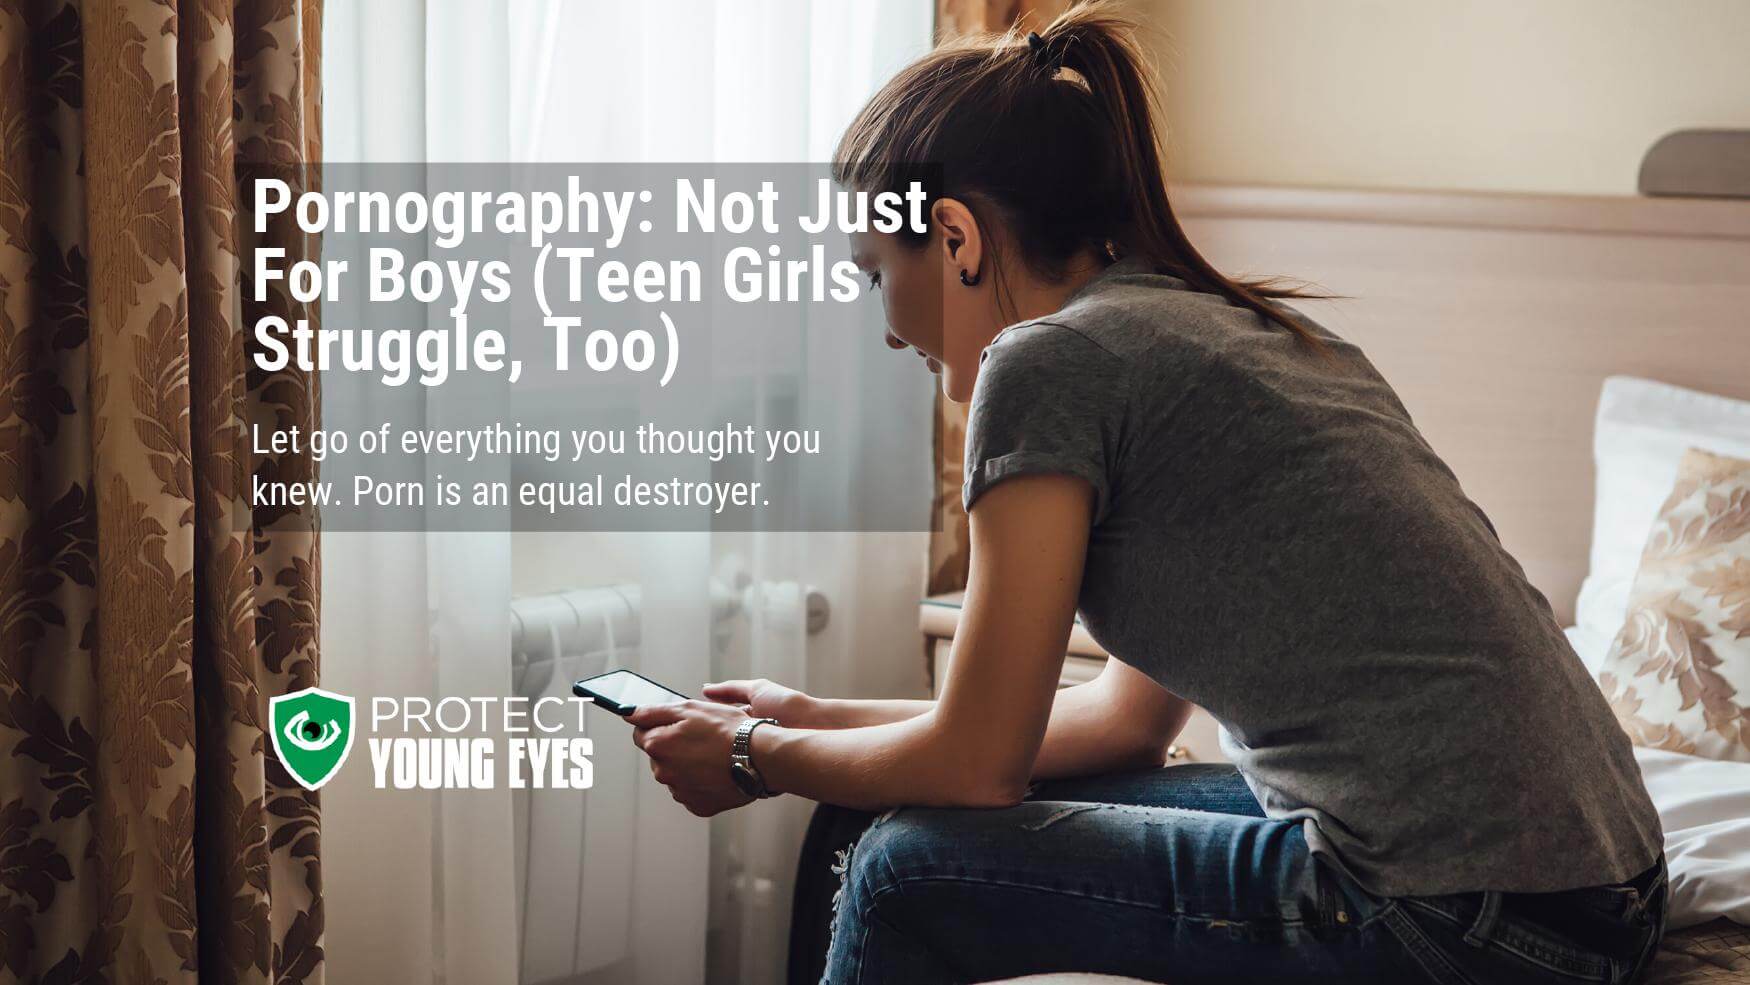 Sex 18 Teen Boy And Girl - Teen Girls Look at Porn, Too (not just boys) | Protect Young Eyes